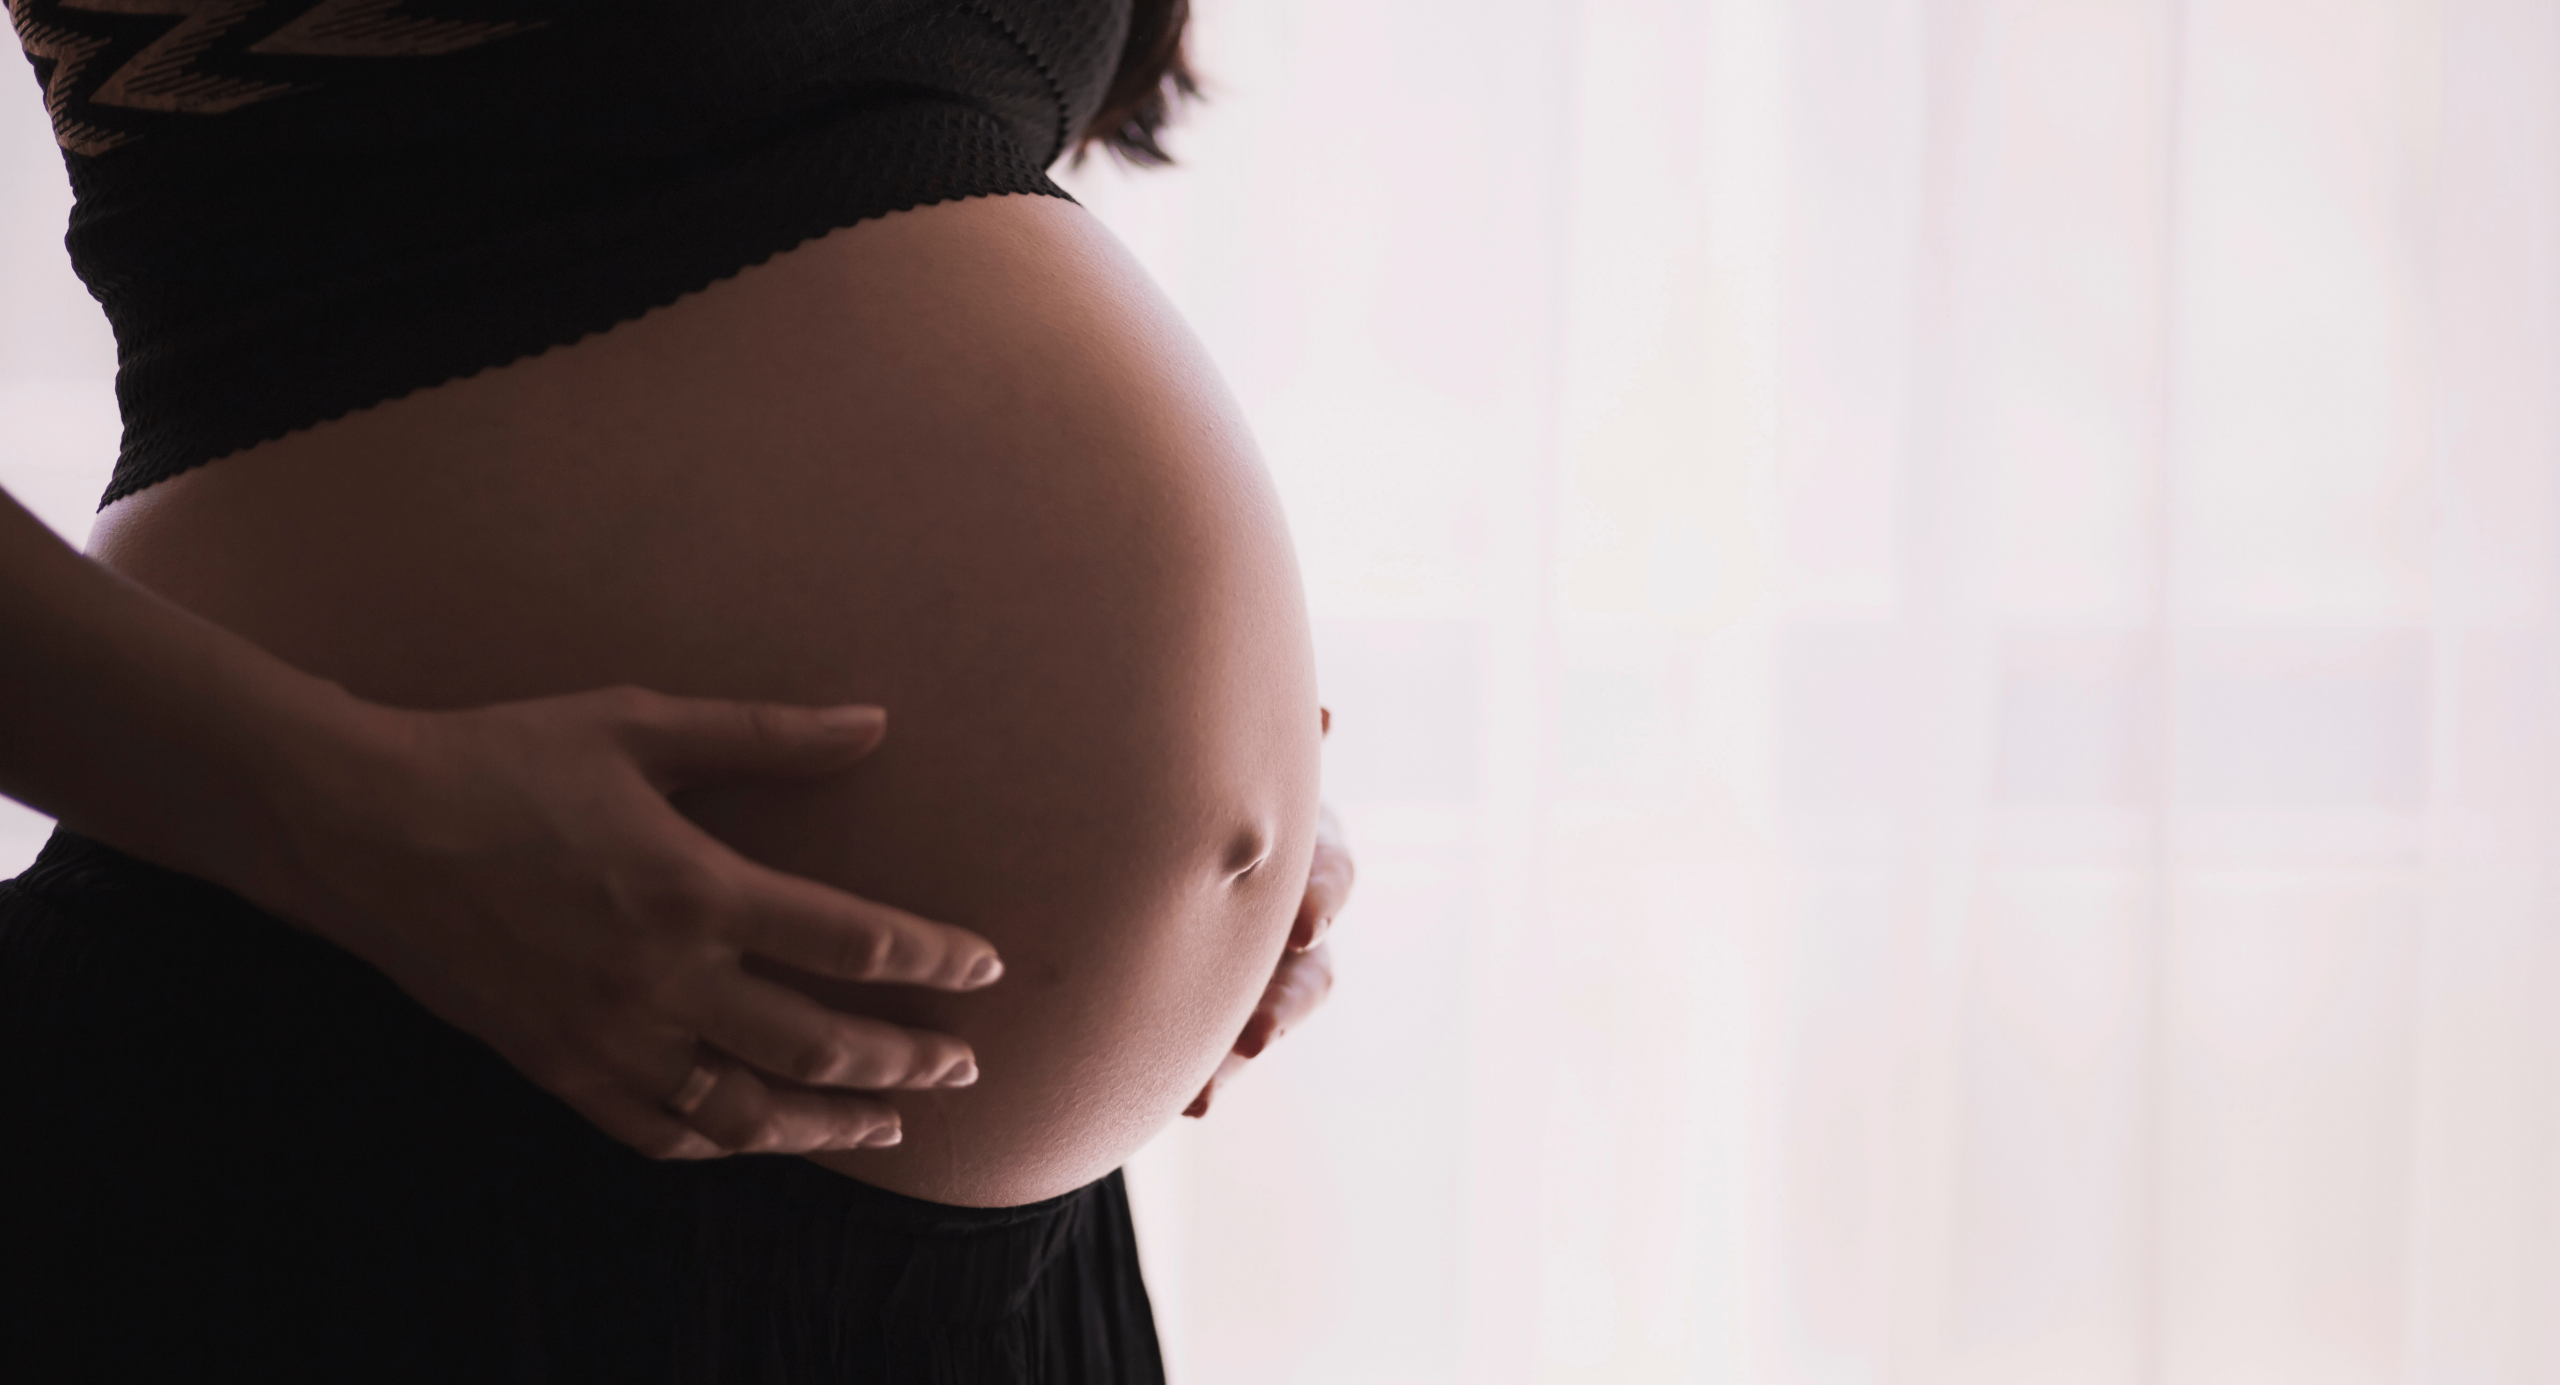 Prenatal and Postpartum Care Physical Therapy at Physio Logic NYC in Brooklyn, NY - Physio Logic NYC Physical Therapy Prenatal and Postpartum Care | https://physiologicnyc.com/physical-therapy/